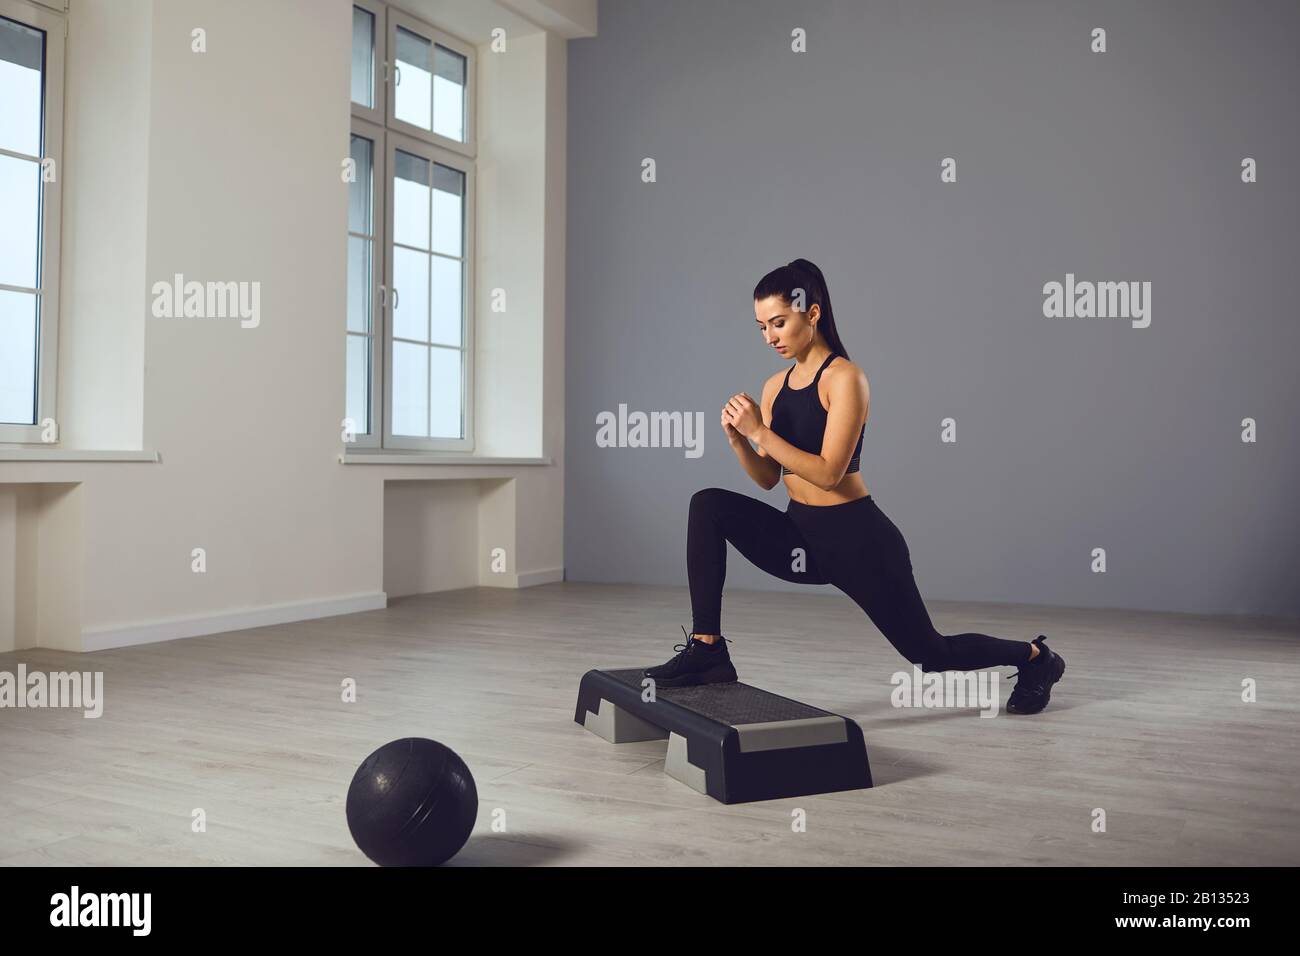 Squat exercises. Girl in black sportswear with dumbbells in her hands doing squats in a room. Stock Photo